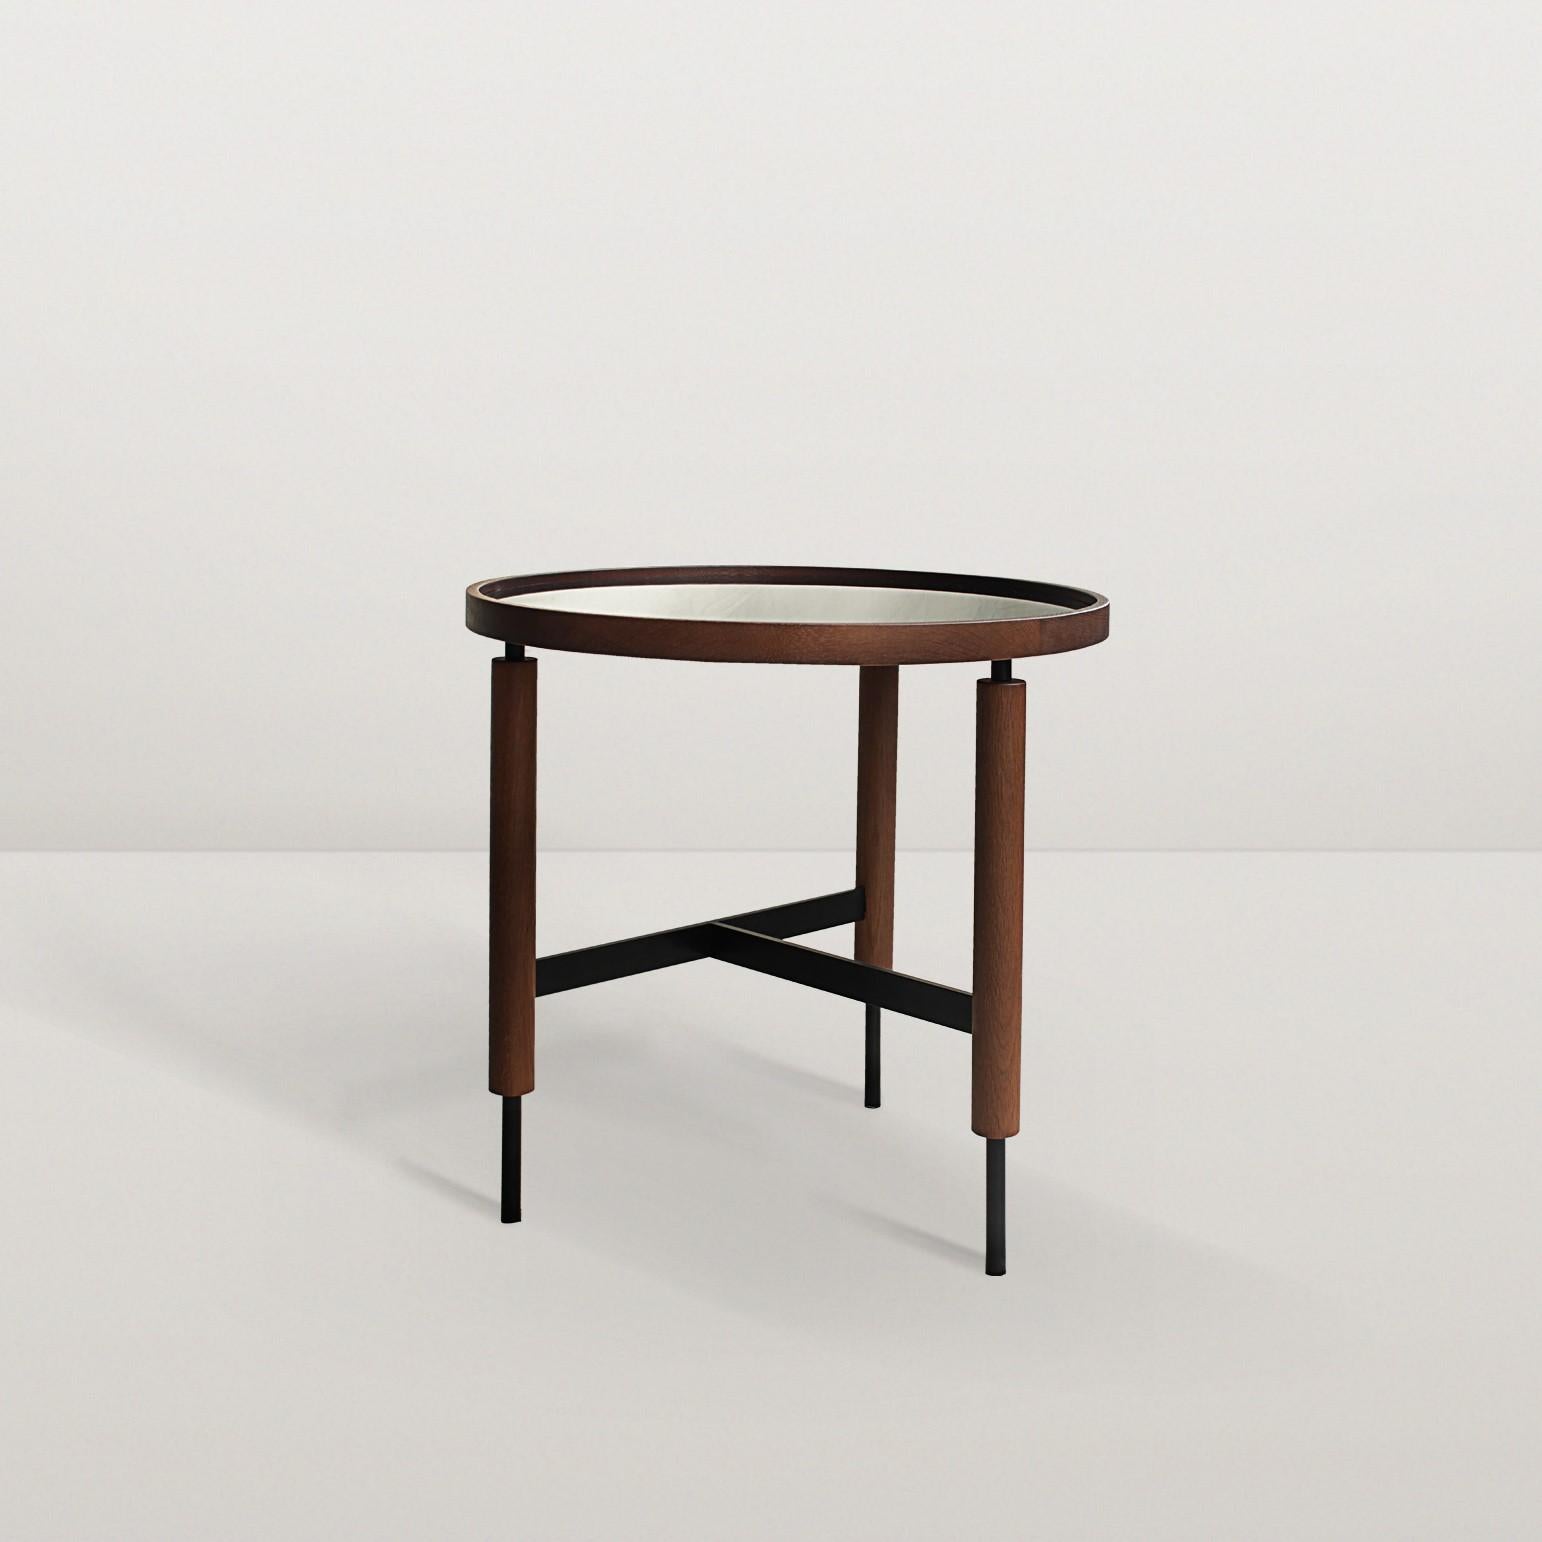 Unique collin side table by Collector
Dimensions: D 50 x H 50 cm
Materials: Glass, oak, metal
Other materials available.

The Collector brand aims to be part of the daily life by fusing furniture to our home routine and lifestyle, that’s why